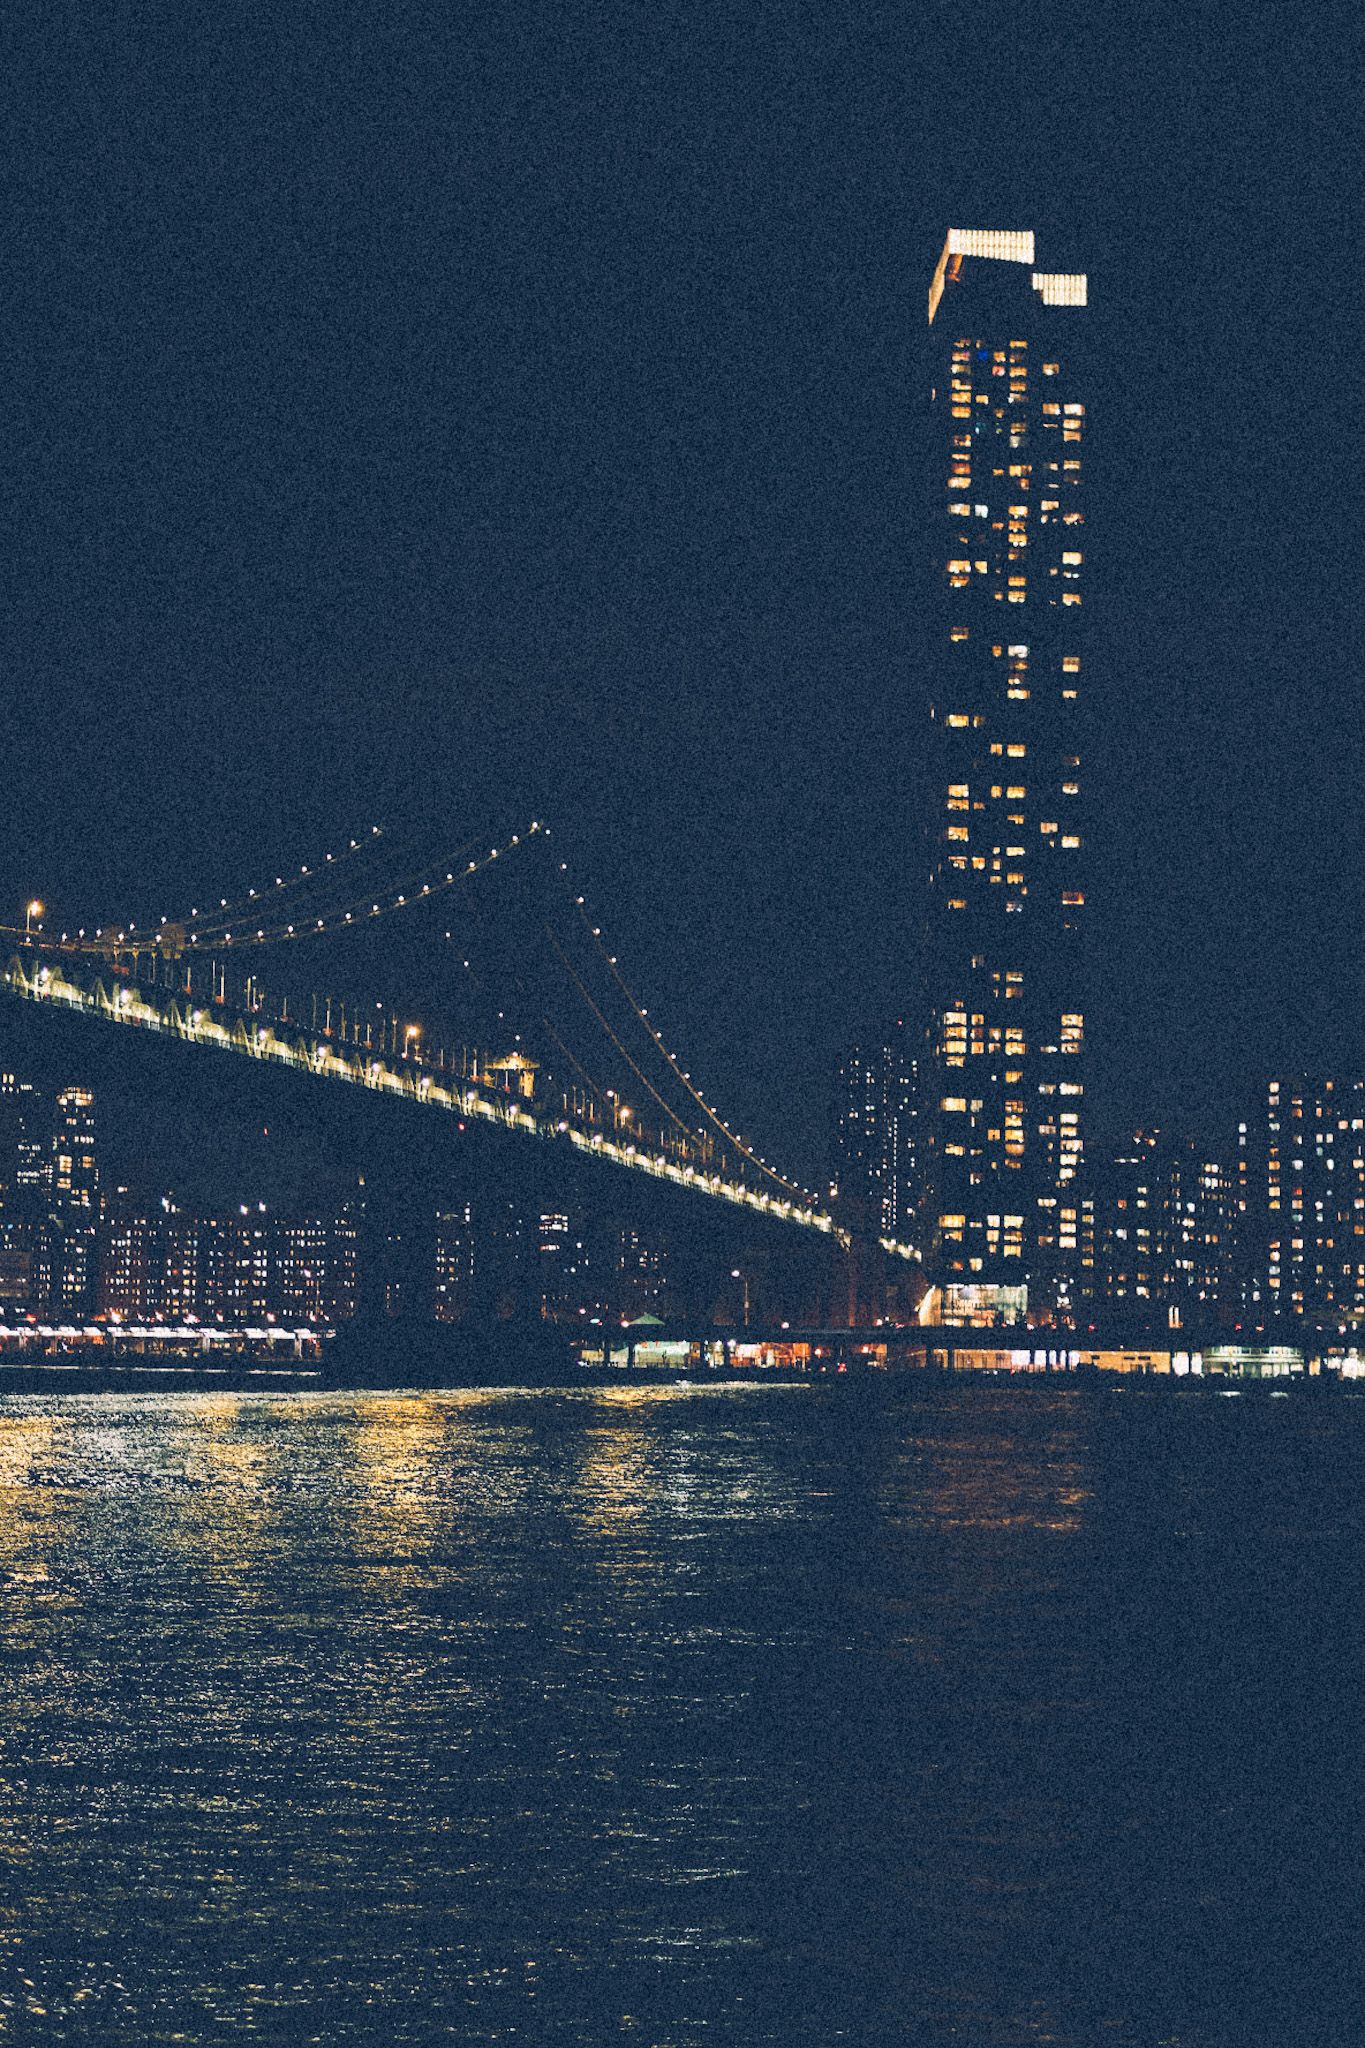 A view of the Manhattan bridge from downtown Brooklyn, overlooking a skyscraper at night. City lights sparkle.